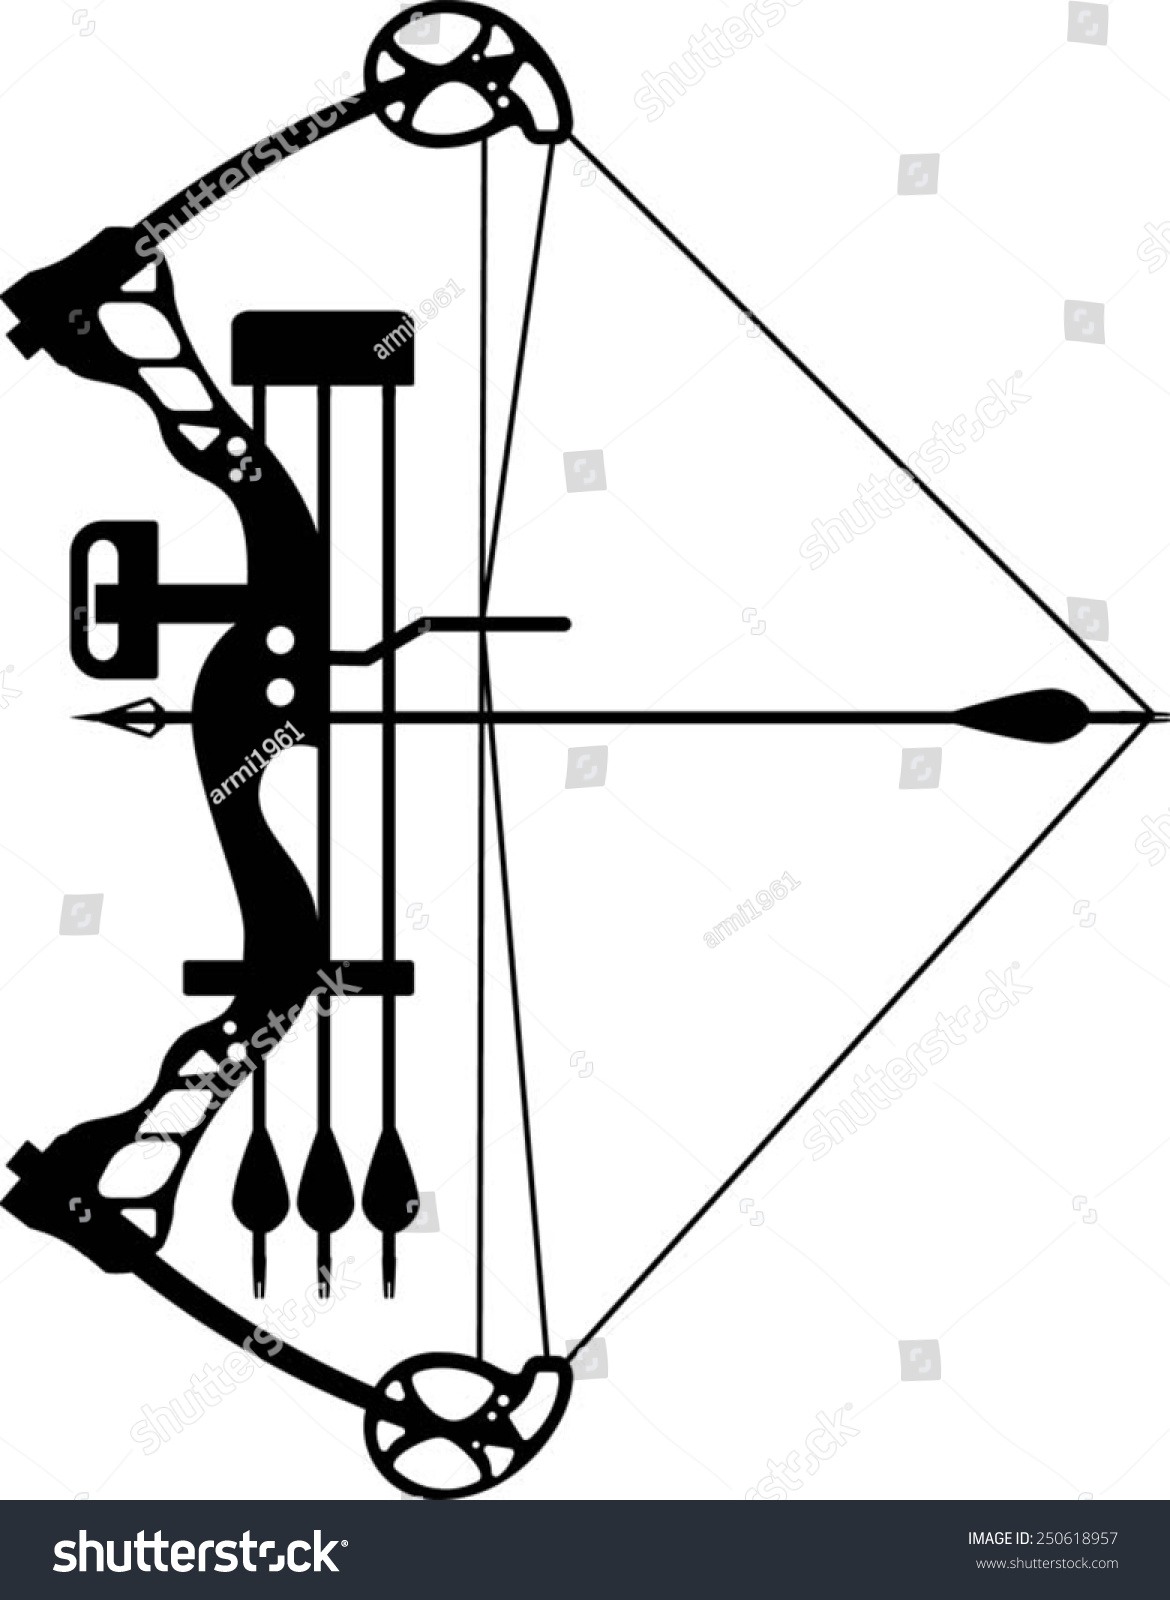 Download Compound Bow Arrow Stock Vector (Royalty Free) 250618957 - Shutterstock